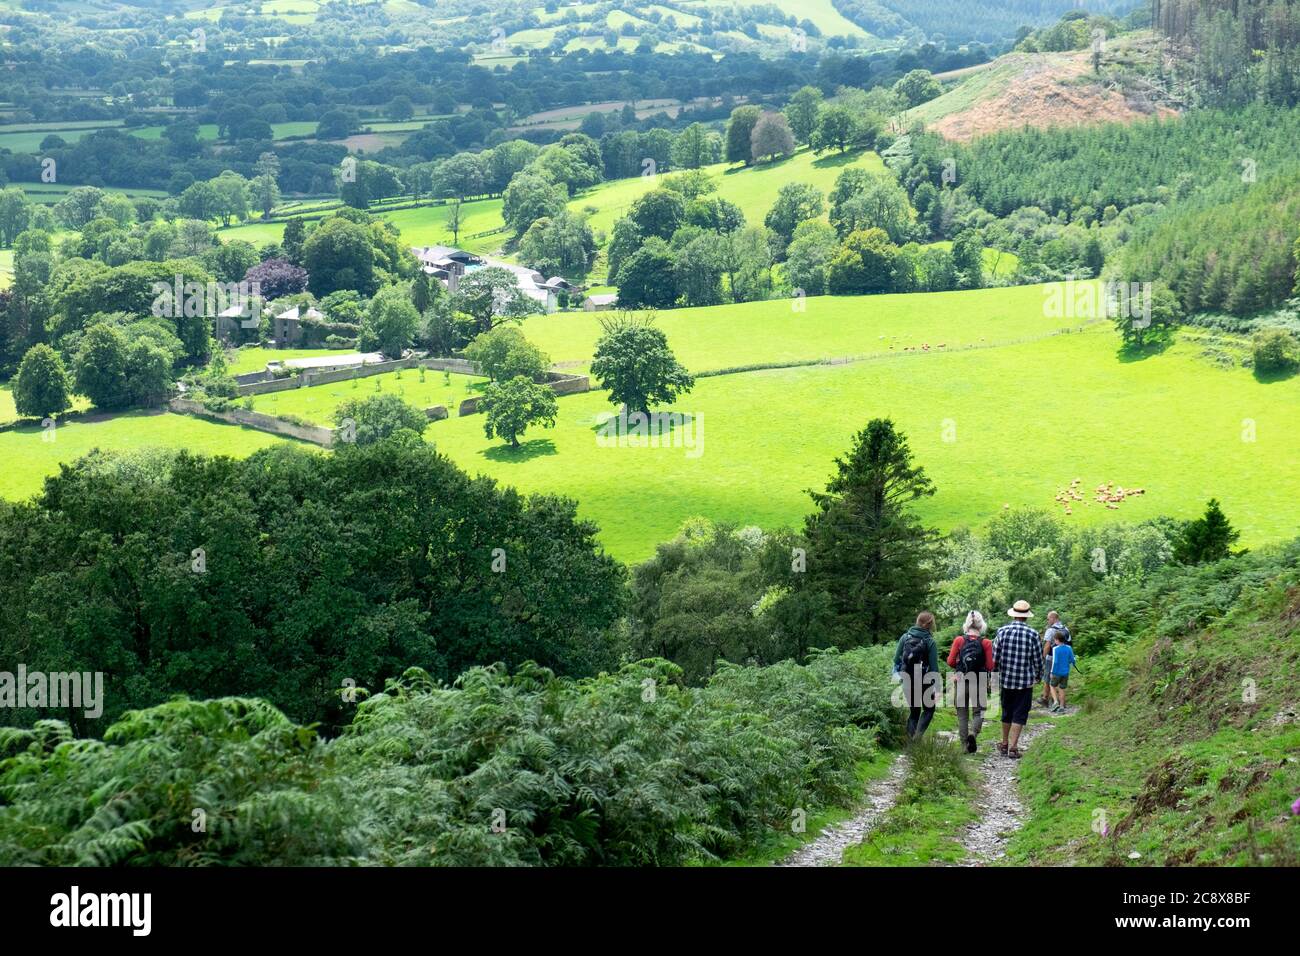 Rear view people walking in countryside on staycation after Covid 19 lockdown is eased in summer July 2020 Carmarthenshire West Wales UK  KATHY DEWITT Stock Photo